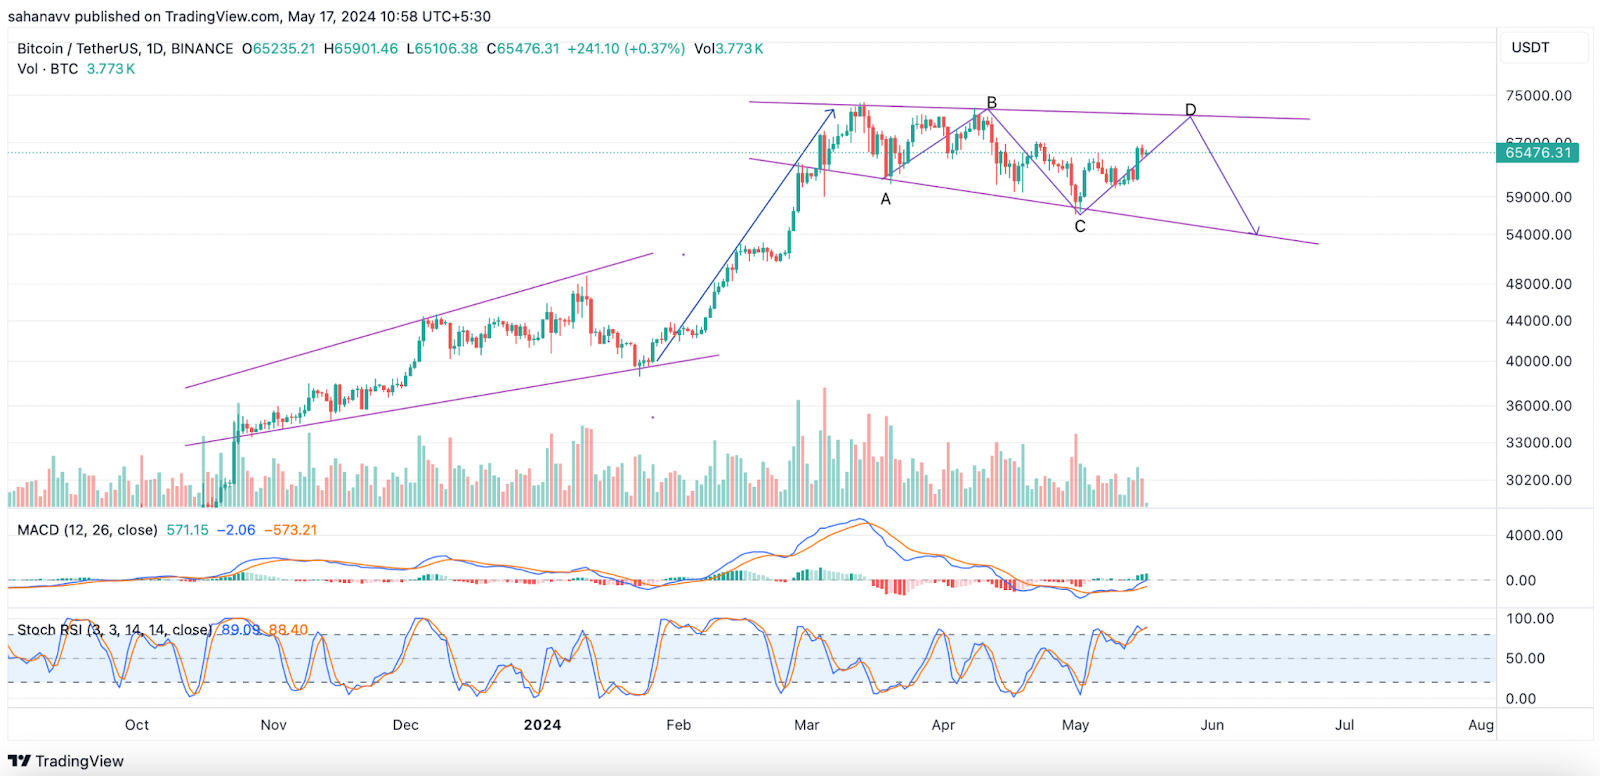 Bitcoin Price Analysis: BTC Price Must Breakout Here to Reach a New ATH in June, Probably Above $80,000